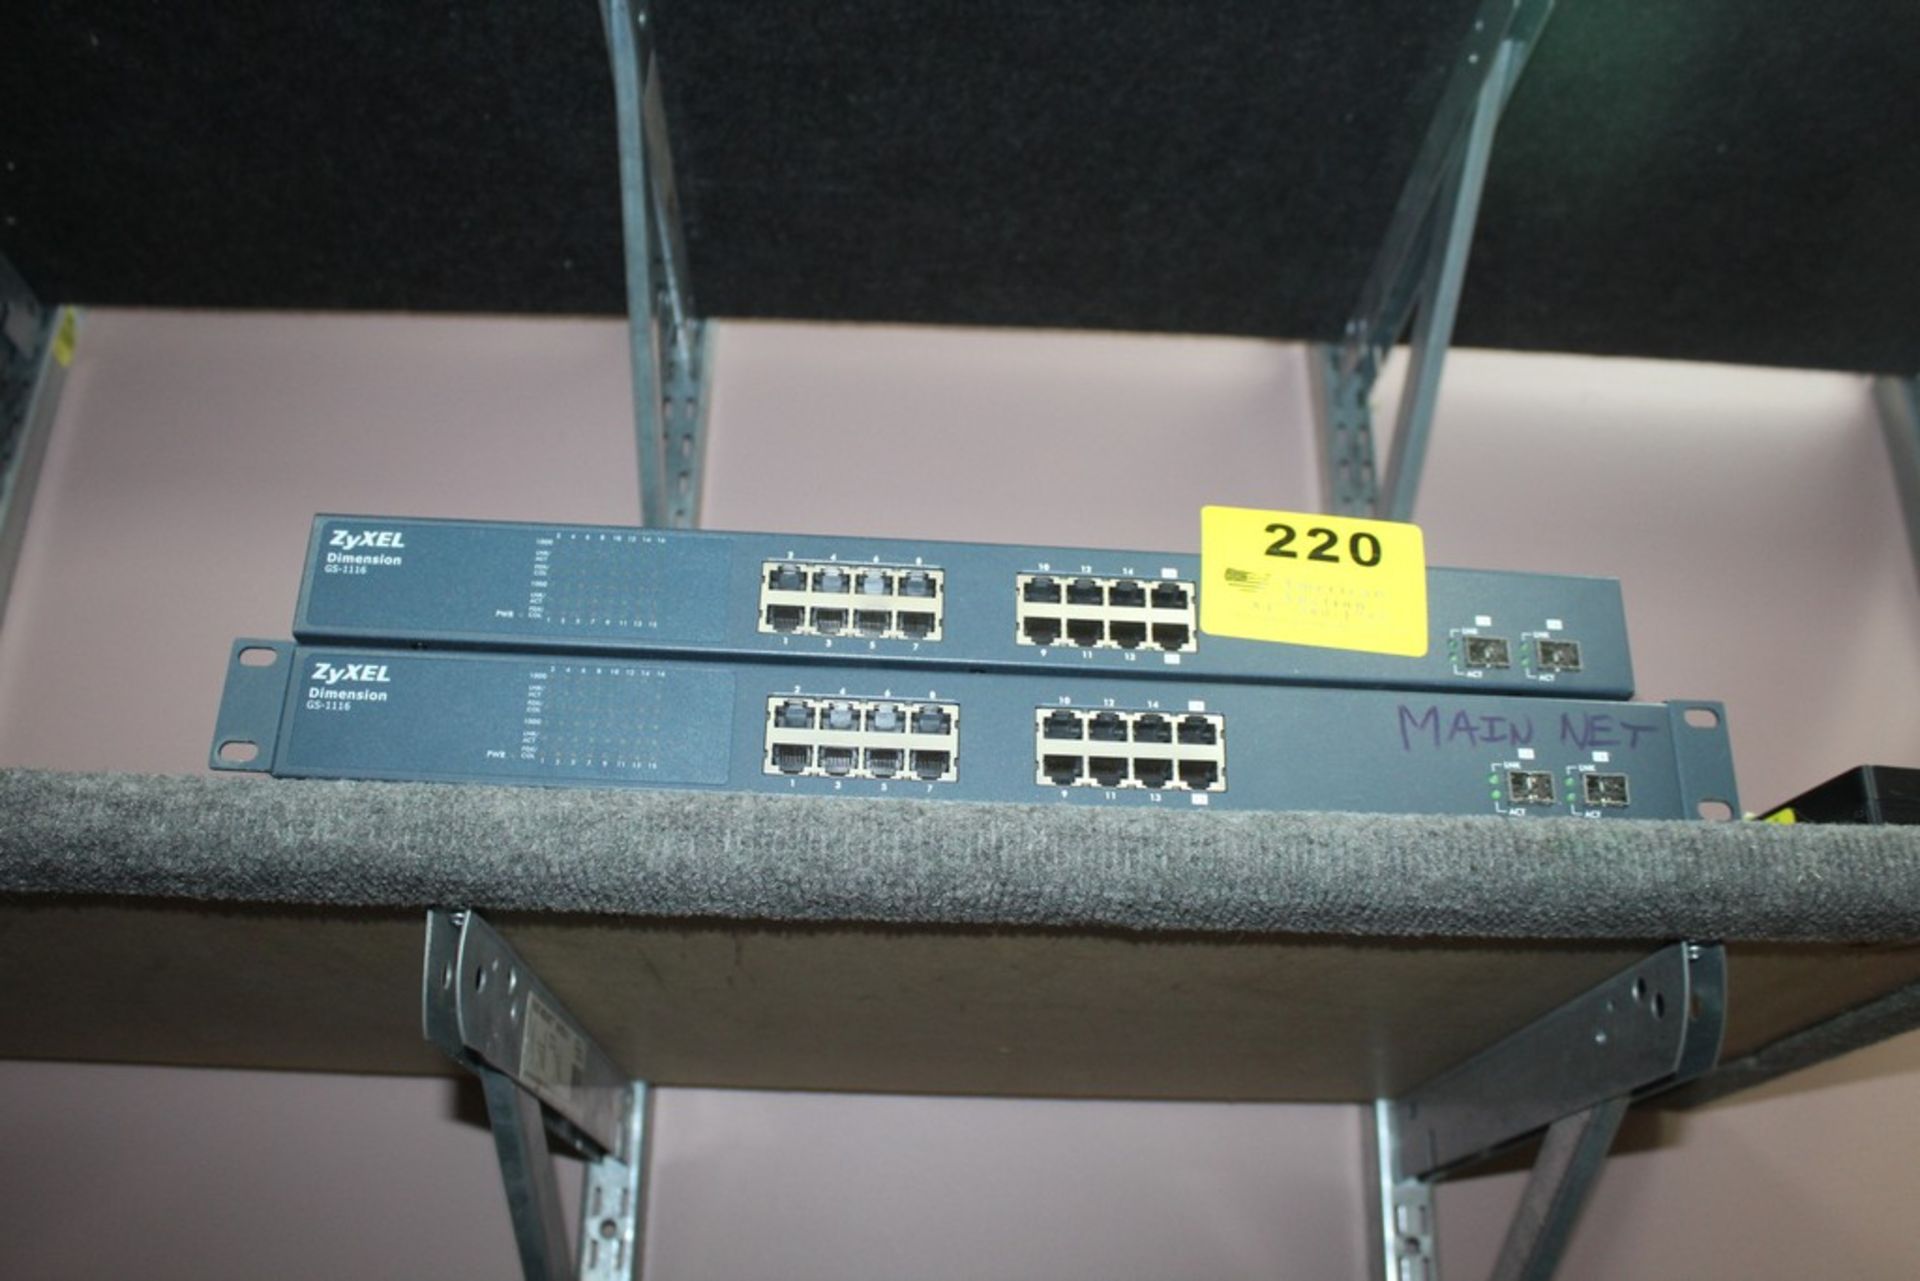 (2) ZYXEL DIMENSION MODEL GS-1116 16-PORT SWITCHES